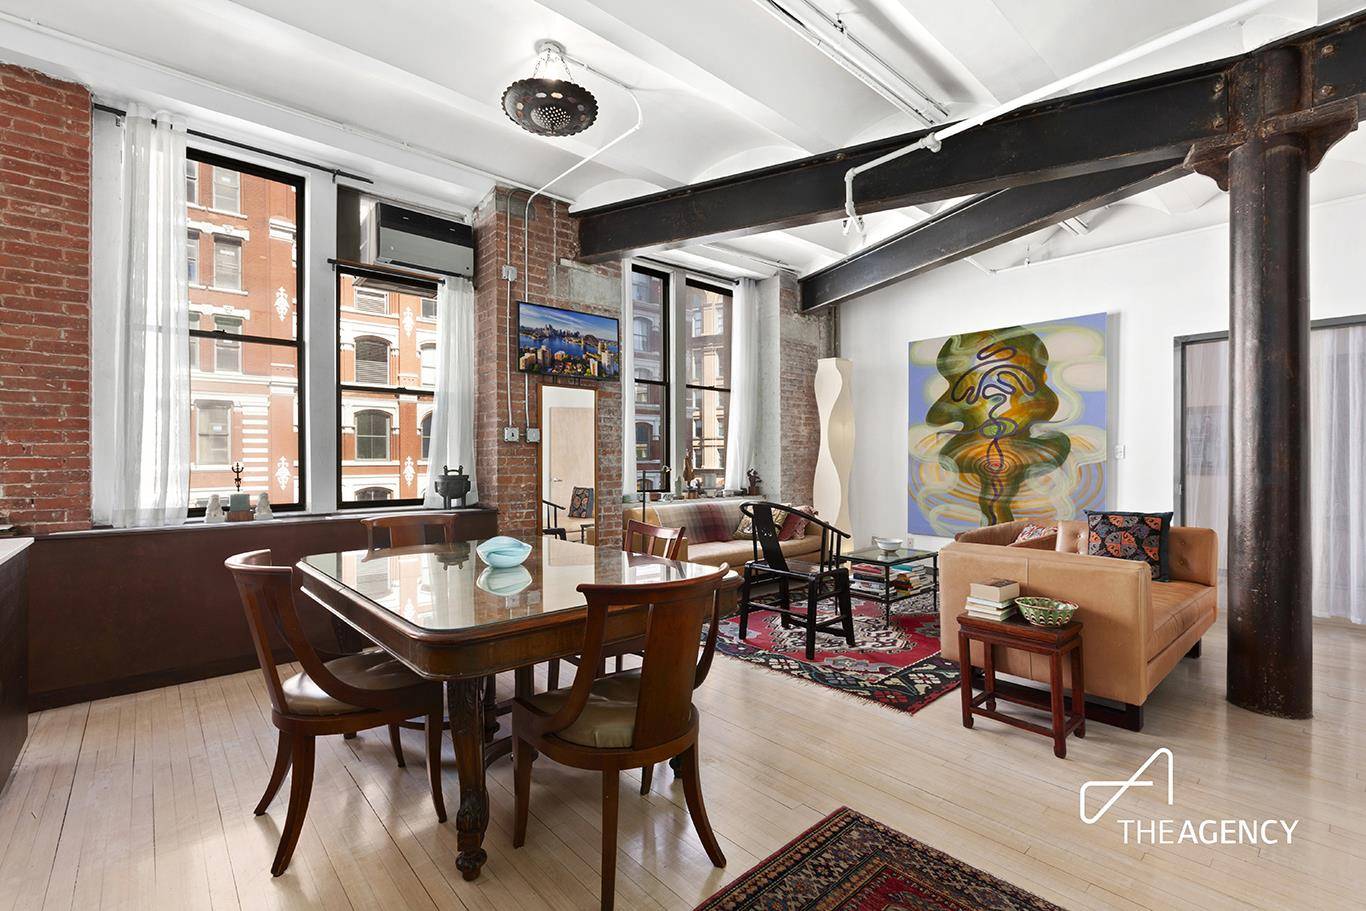 Rare Classic 3BR Loft Available for rent in Astor Place.